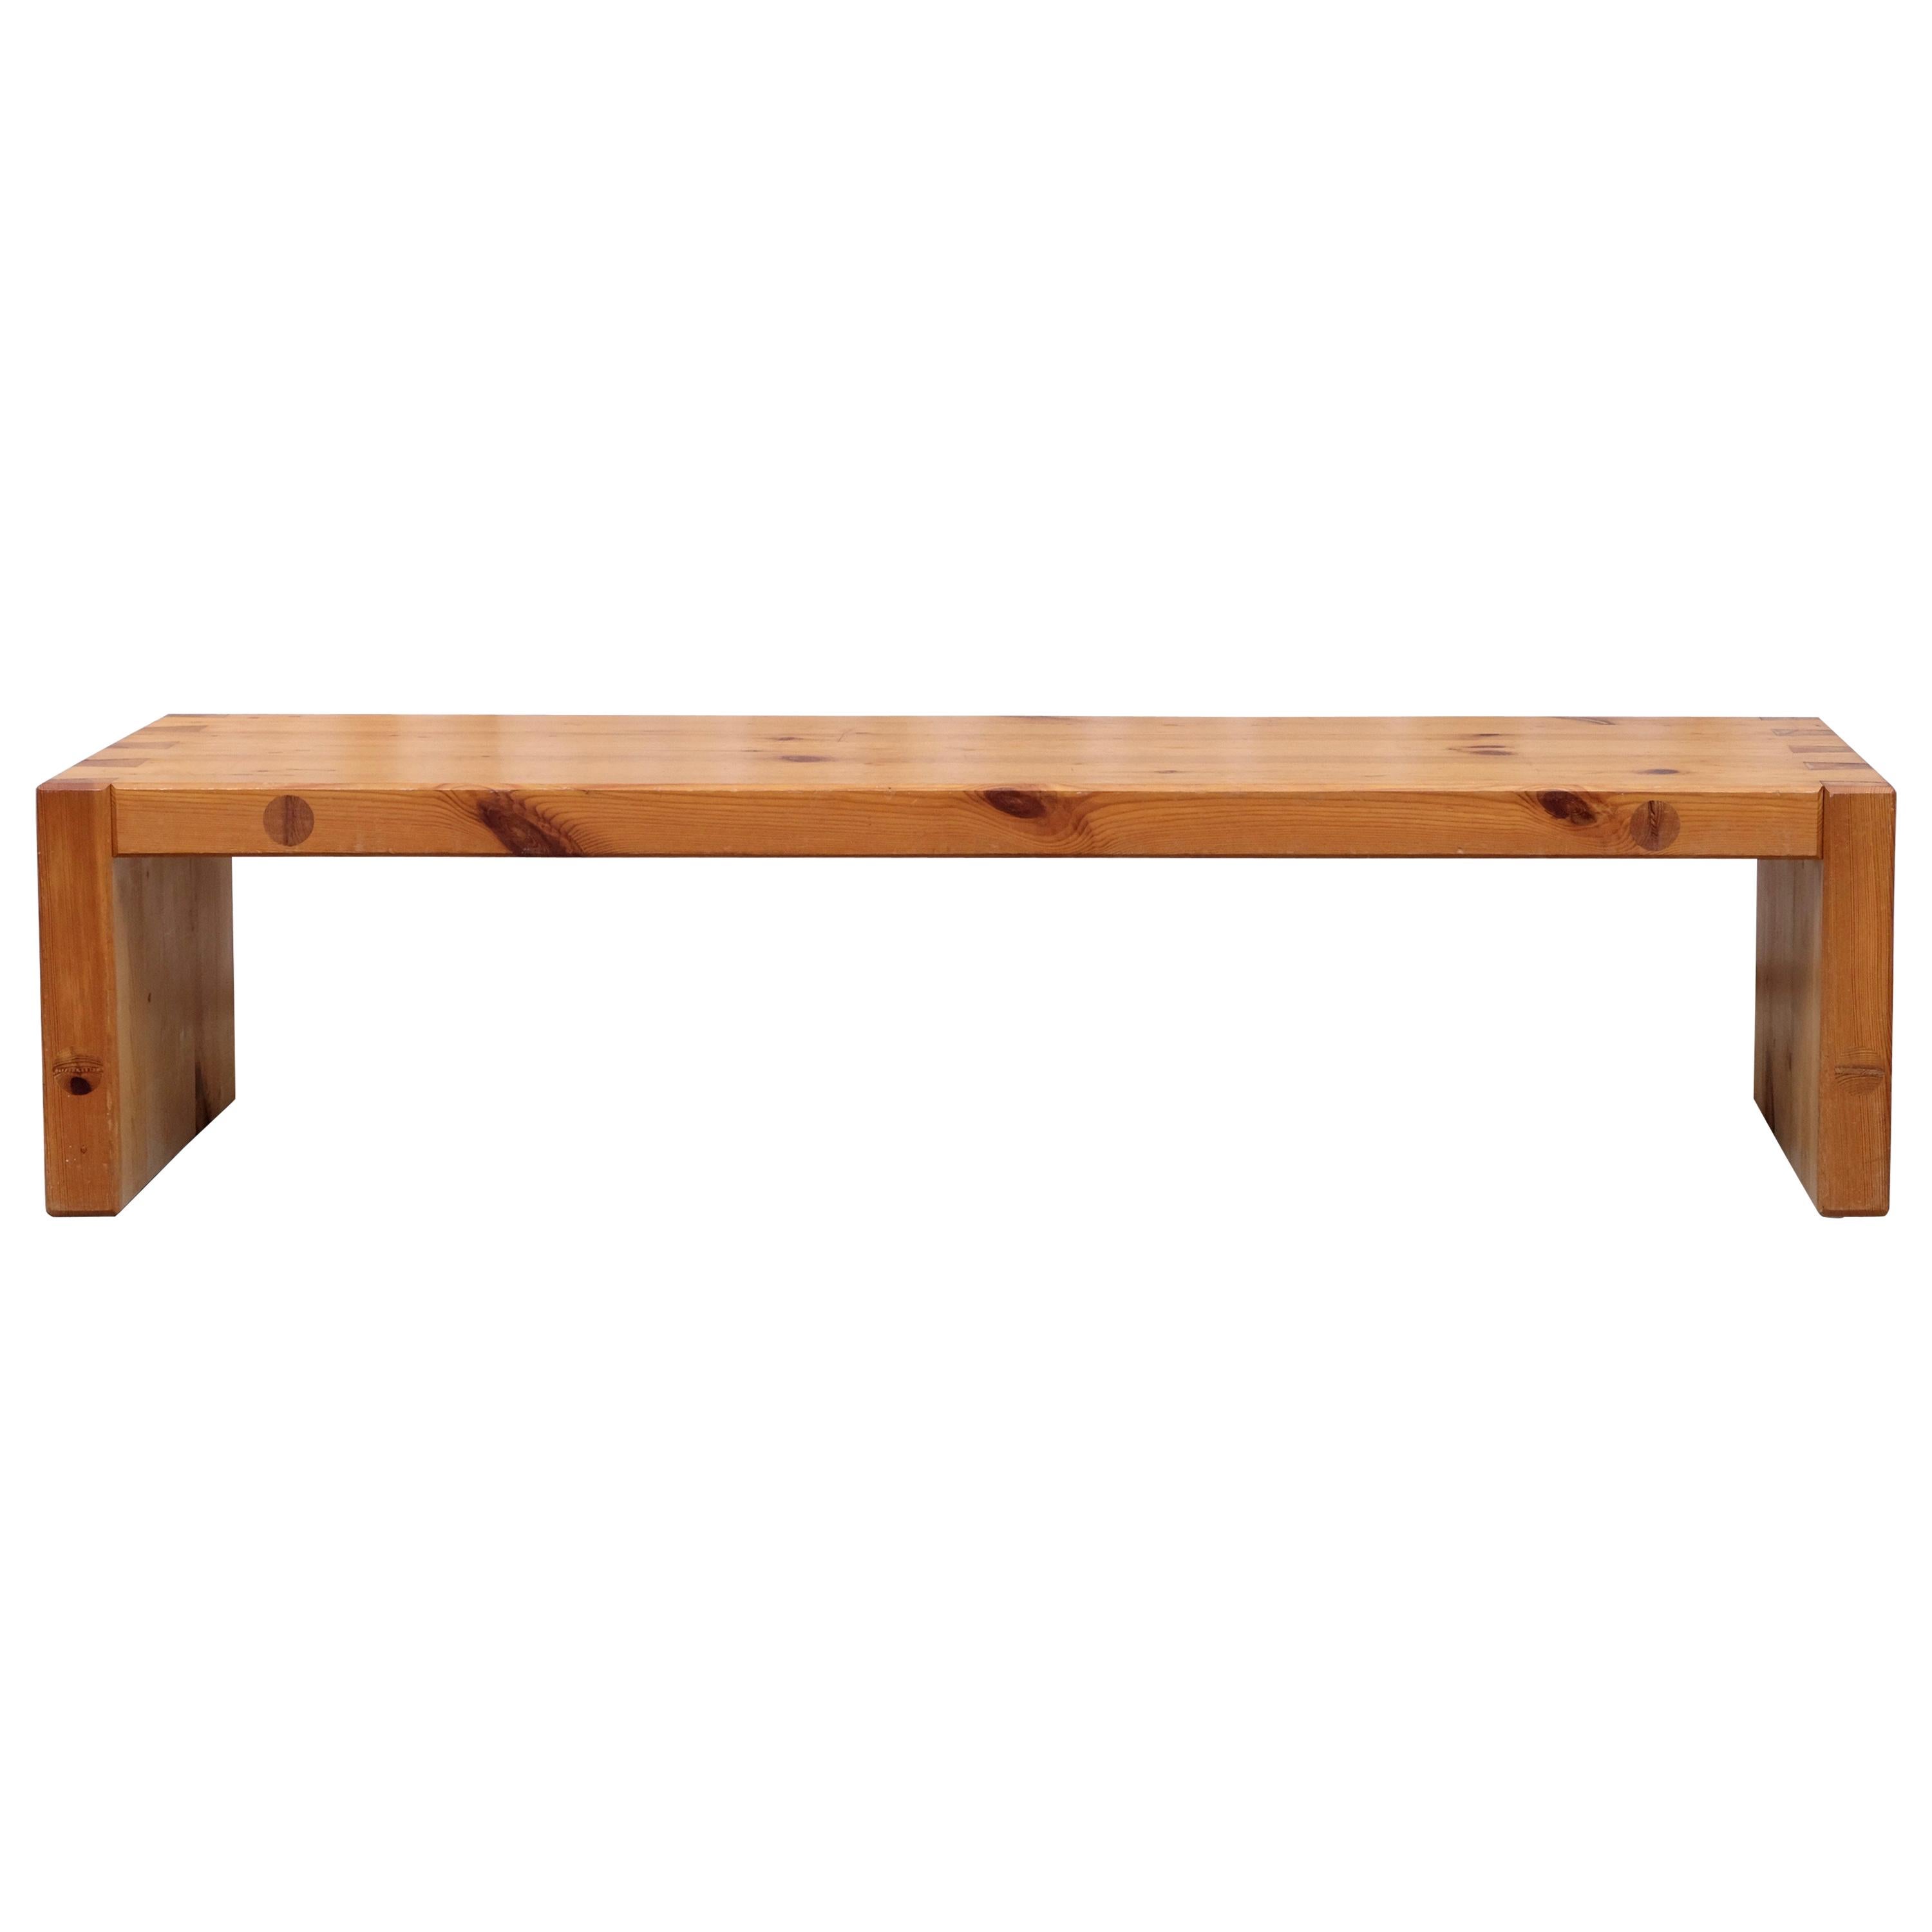 Roland Wilhelmsson Table / Bench in Pine, Produced in Sweden, 1960s For Sale